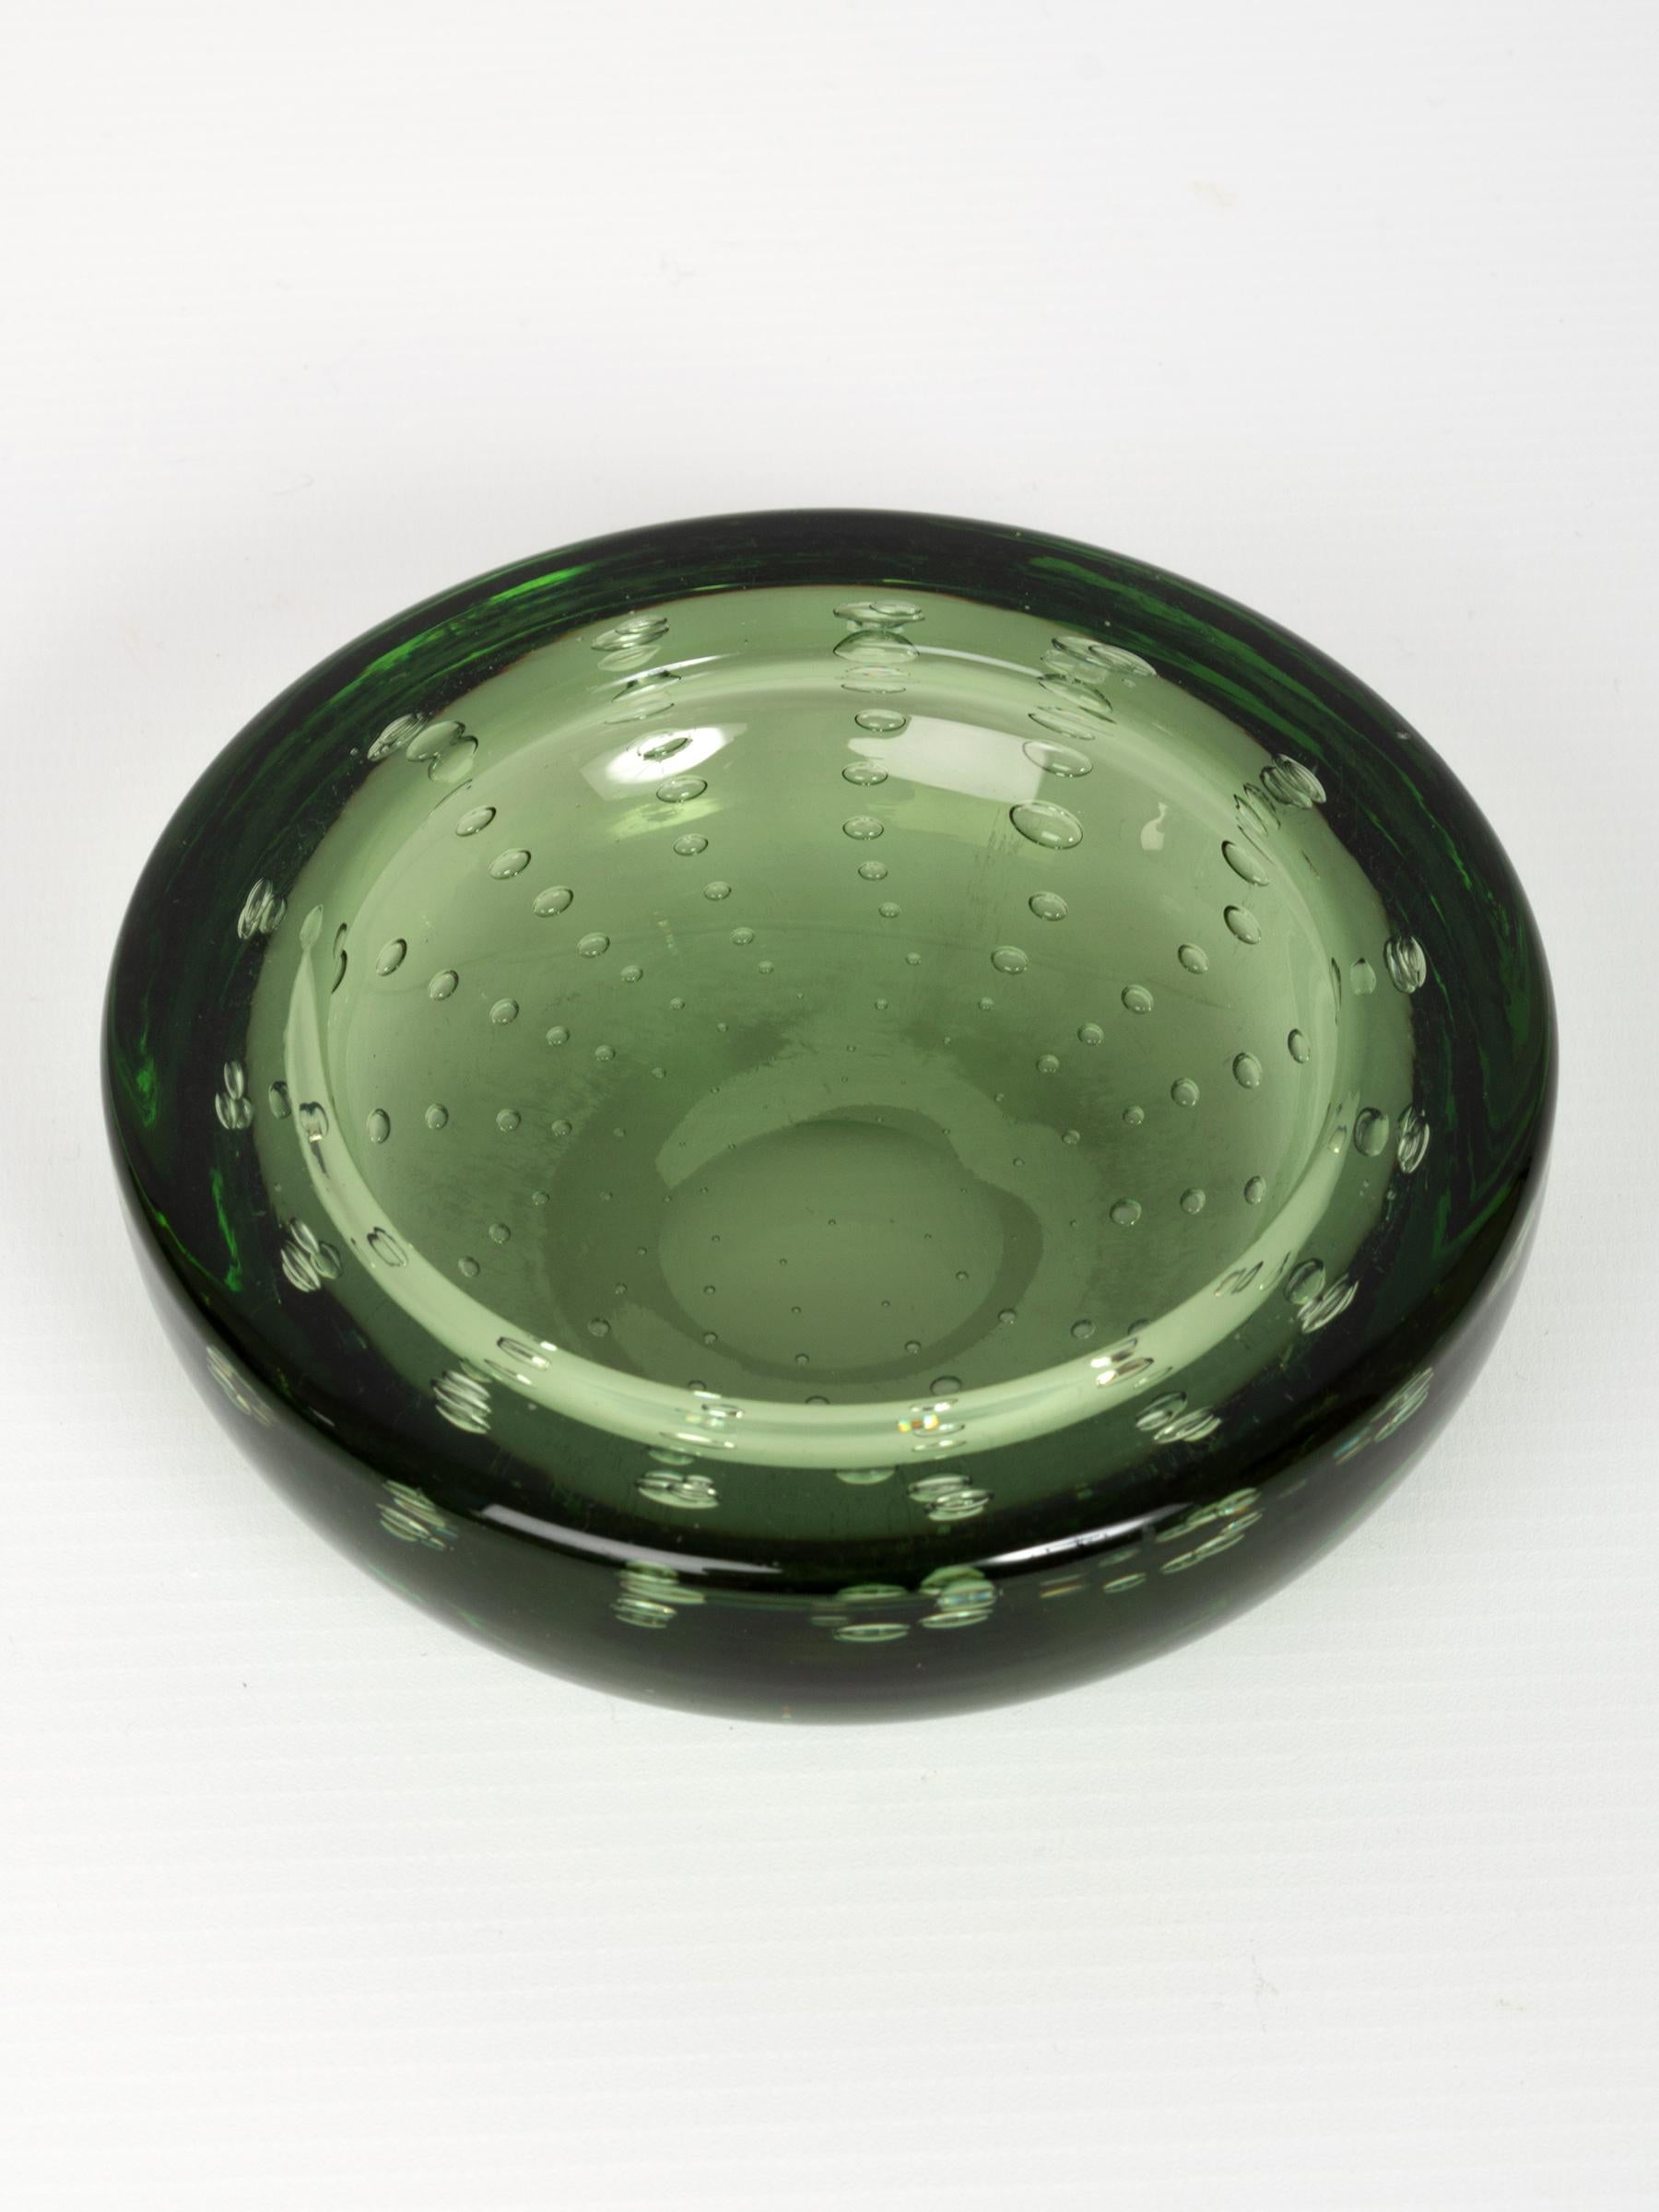 Murano green ashtray bowl with air bubbles by Archimede Seguso, Italy, C.1960.
In very good vintage condition.